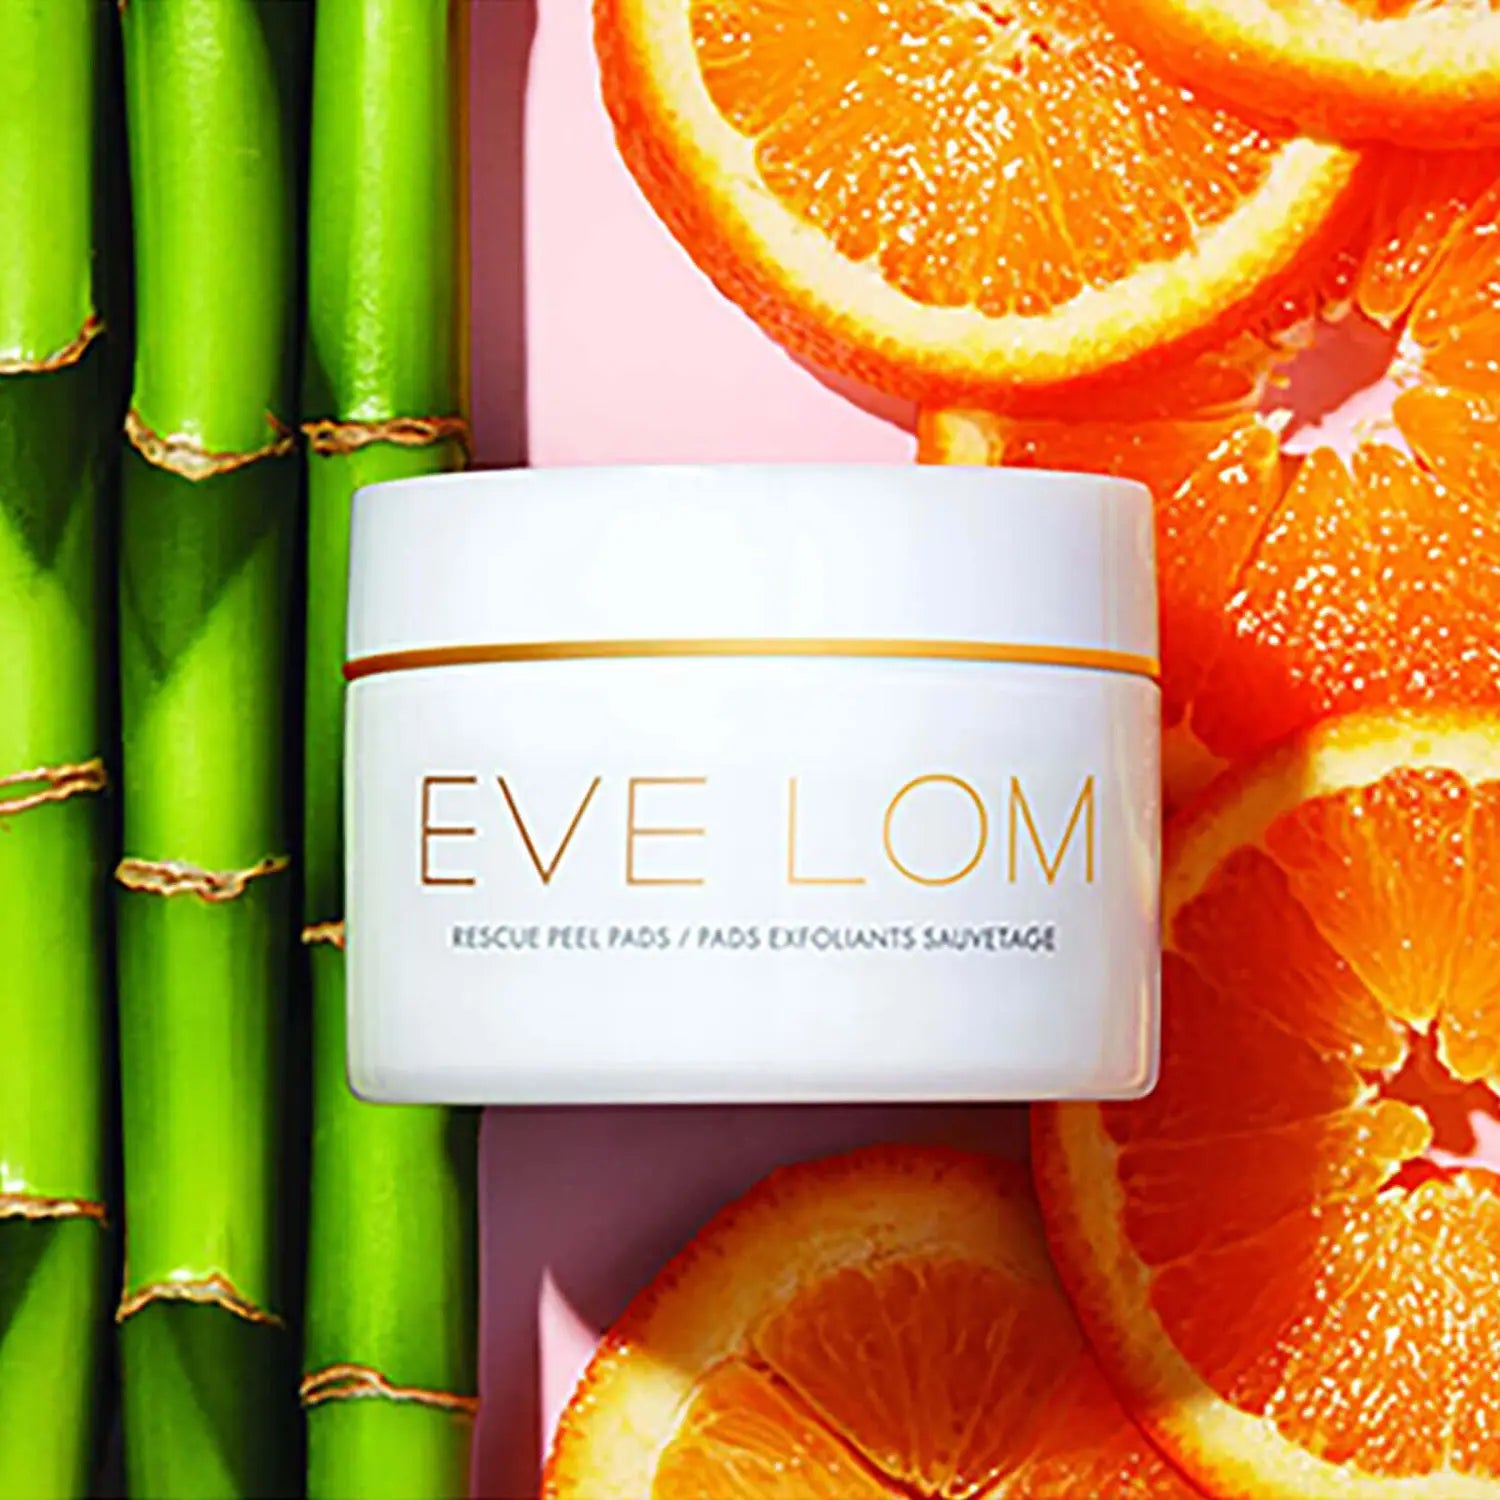 Eve Lom Rescue Peel Pads (60 Pads) - Exfoliating and Resurfacing Treatment with BHA, PHA, and AHA Acids. Reveals smoother, brighter, and revitalized complexion. Contains Glycolic Acid, Multi-Fruit Acid Complex, and Lactic Acid for hydration and conditioning. Removes build-up and soothes irritation. 100% Biodegradable materials for thorough cleanse. Paraben, Phthalate, Sulphate, and Cruelty-free. Key benefits include decongesting pores, gentle exfoliation, preserving moisture, soothing effect, and increased 